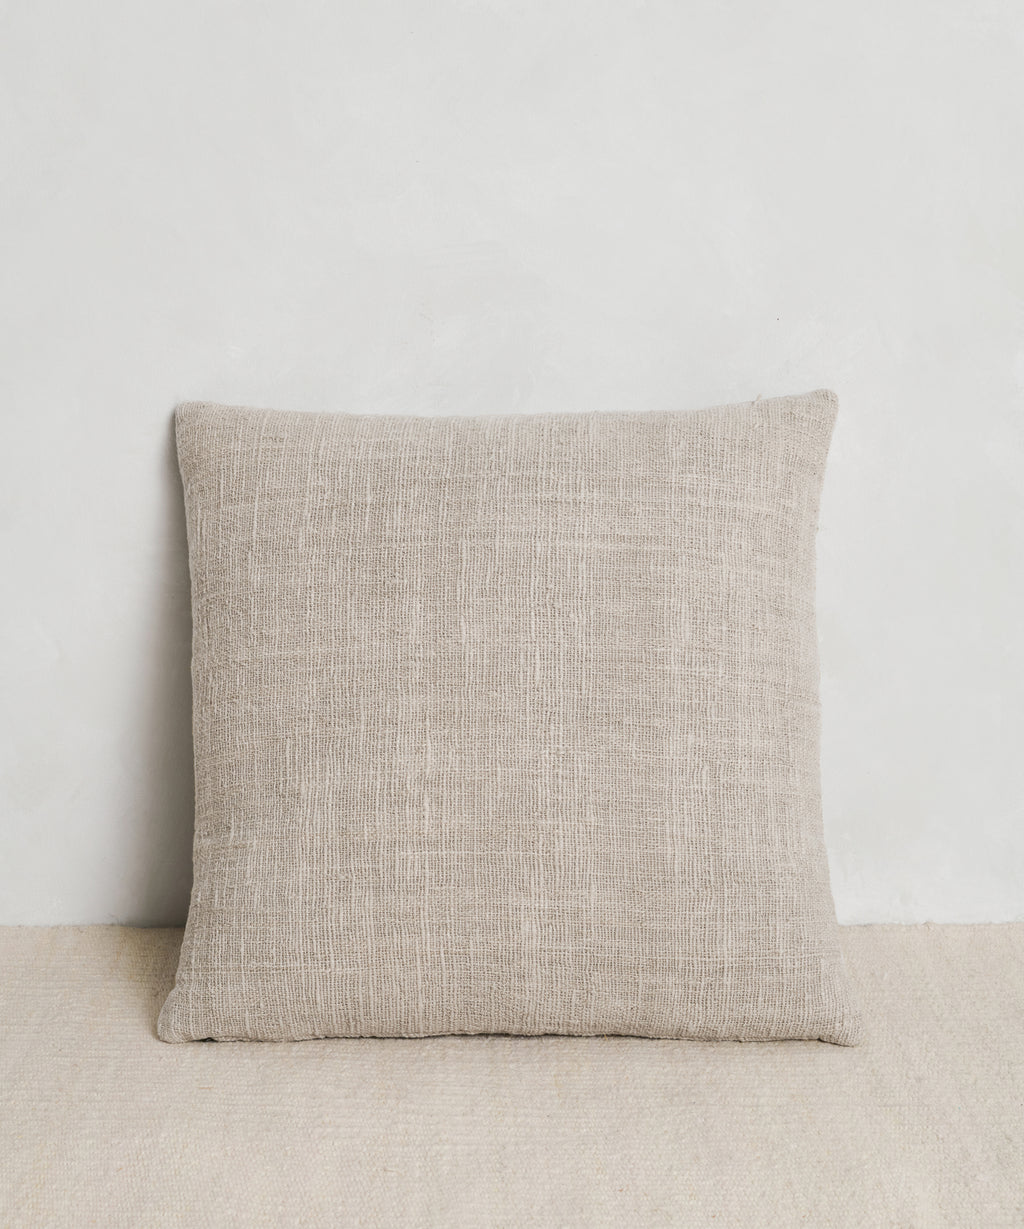 Meet the Pillows and Throws Made for Every Space – Jenni Kayne